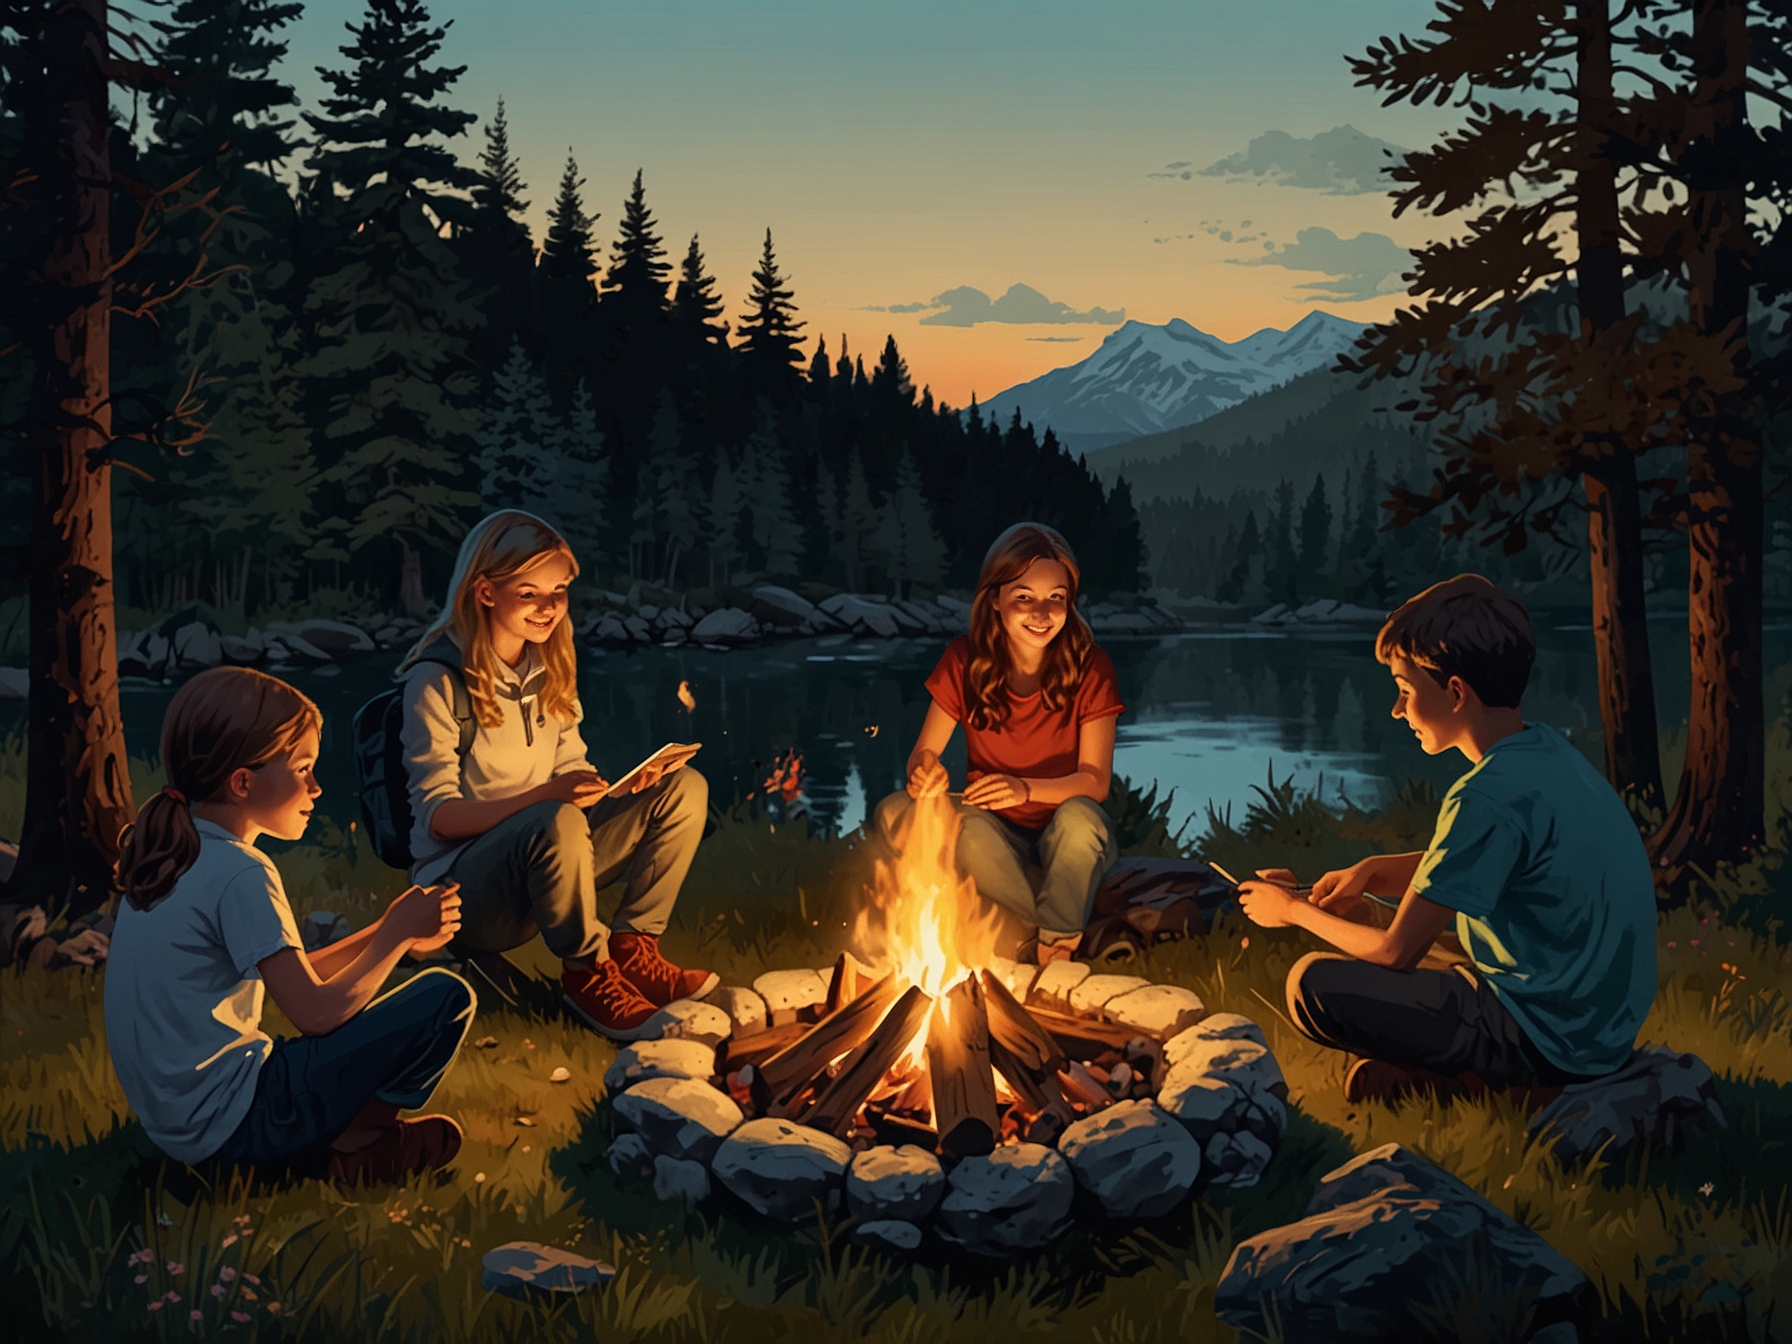 Kids roasting marshmallows over a campfire, enjoying classic camping meals like hot dogs and s’mores, surrounded by the natural beauty of a state or national park.